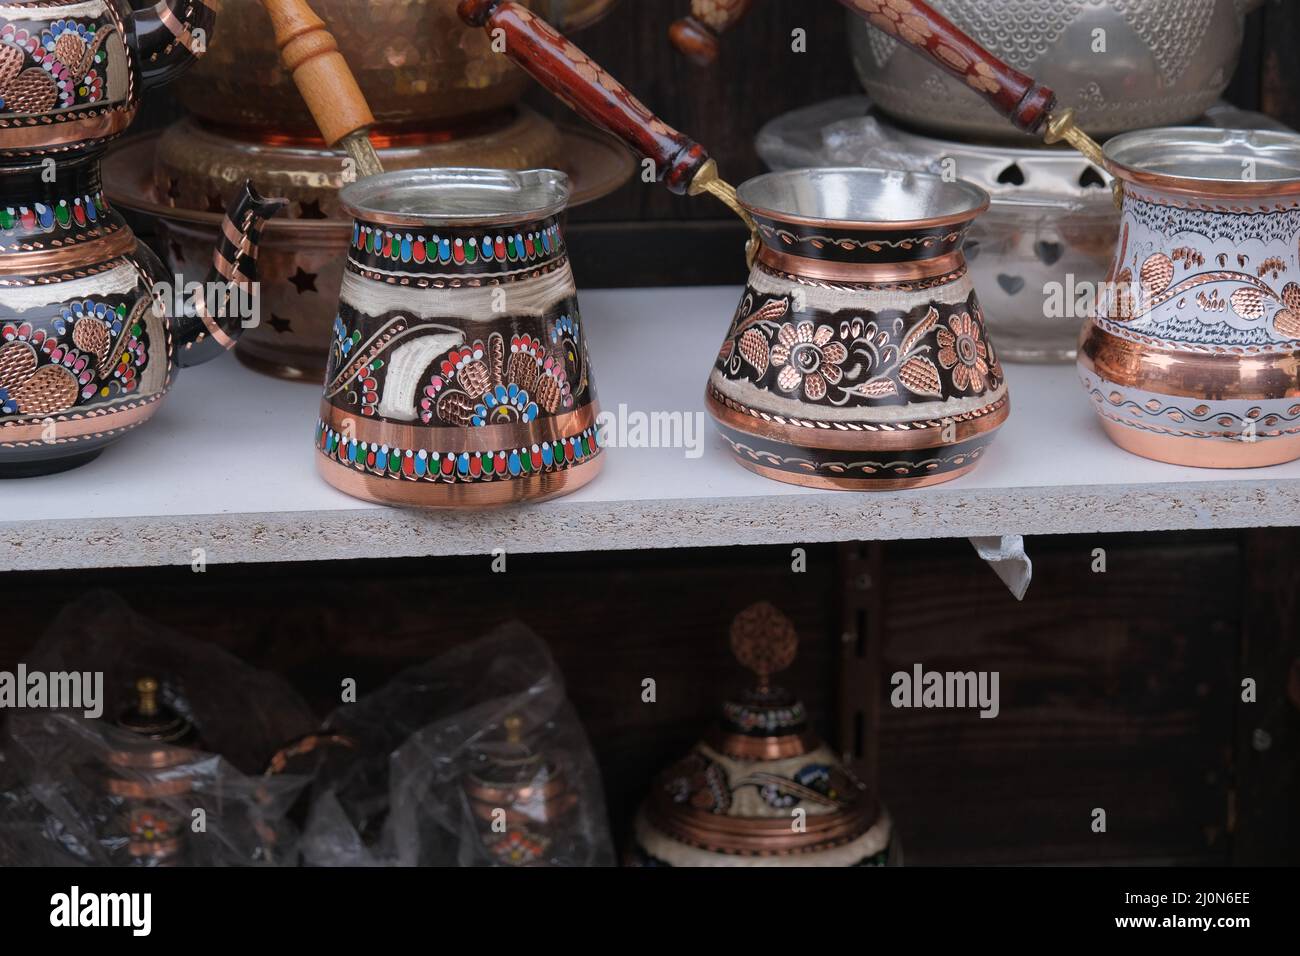 https://c8.alamy.com/comp/2J0N6EE/ancient-style-coffee-pot-antique-copper-made-traditional-turkish-coffee-maker-2J0N6EE.jpg